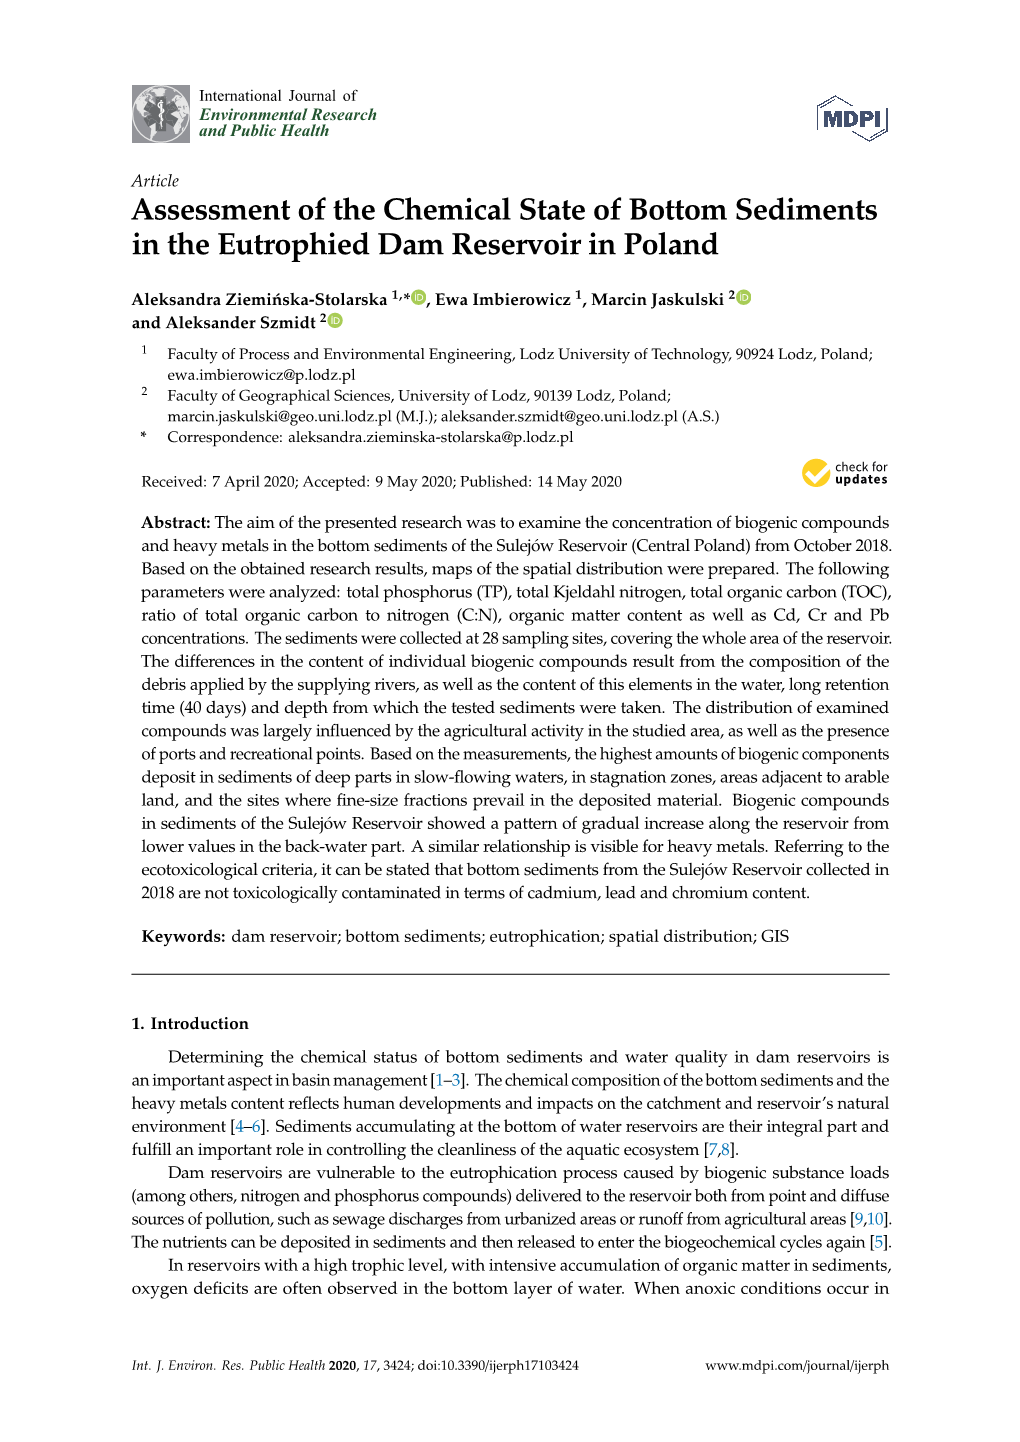 Assessment of the Chemical State of Bottom Sediments in the Eutrophied Dam Reservoir in Poland